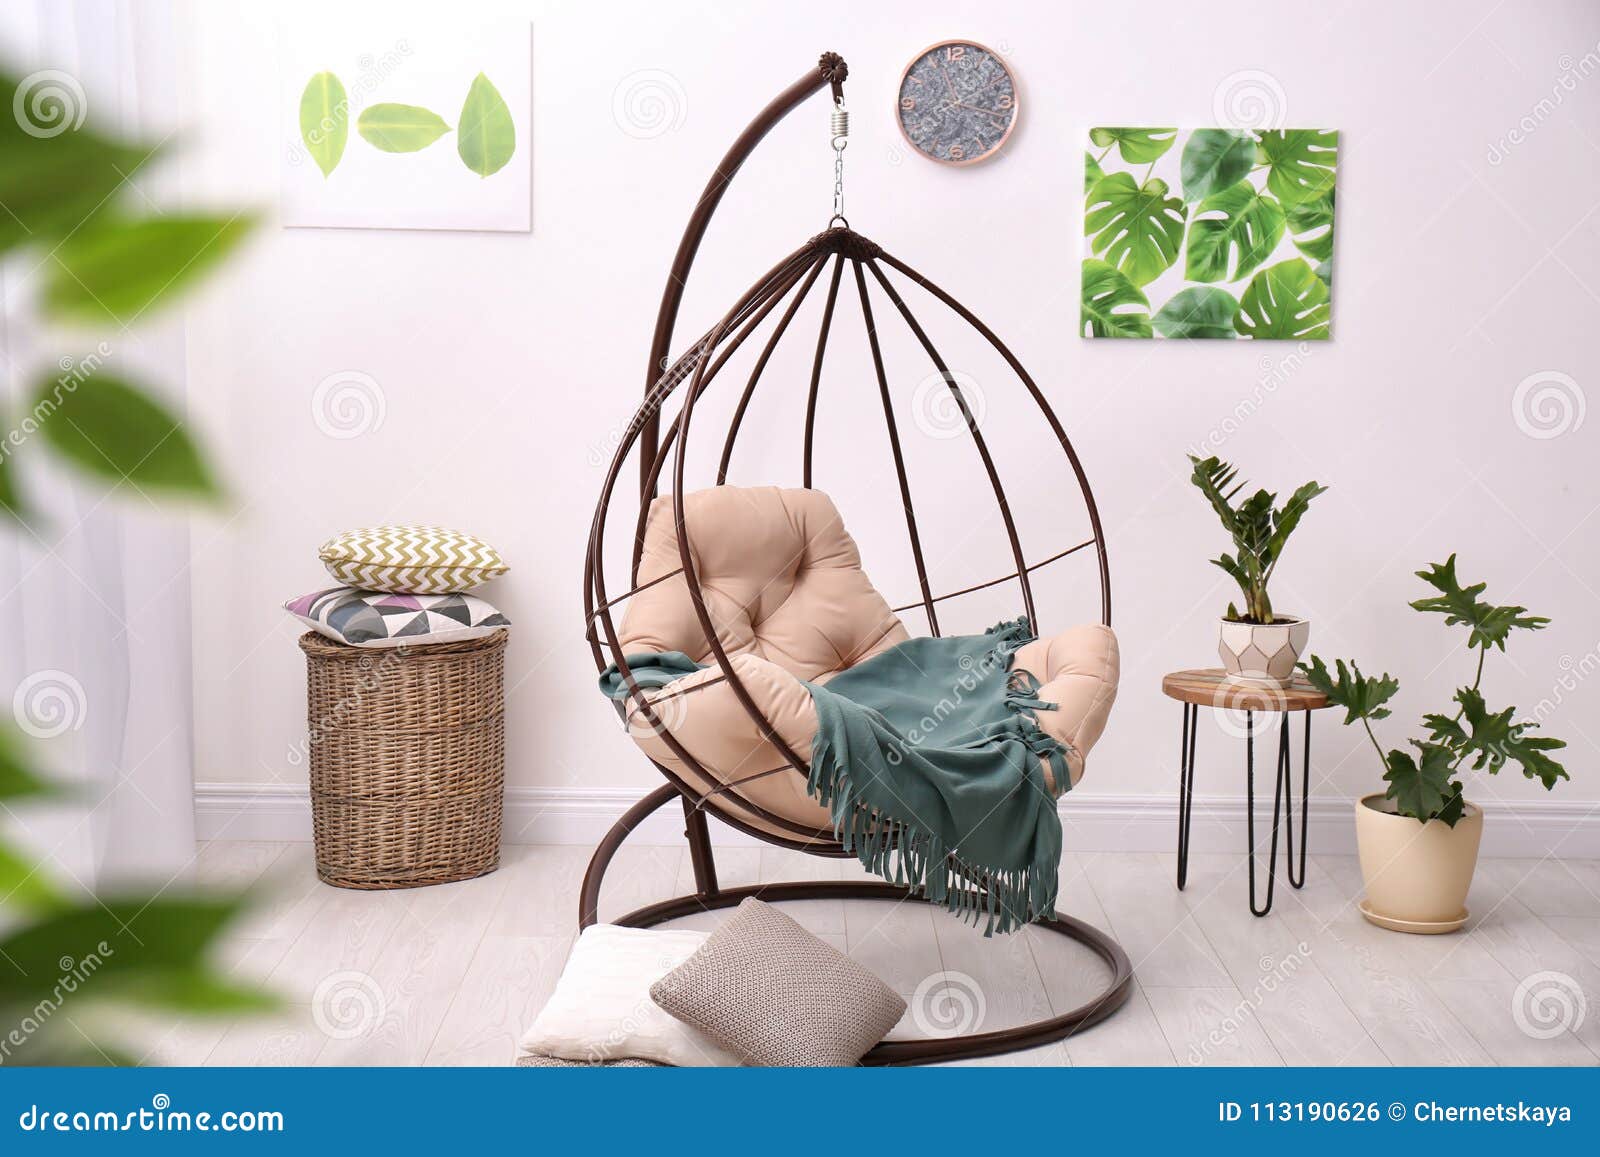 Tropical Plants With Green Leaves And Swing Chair Stock